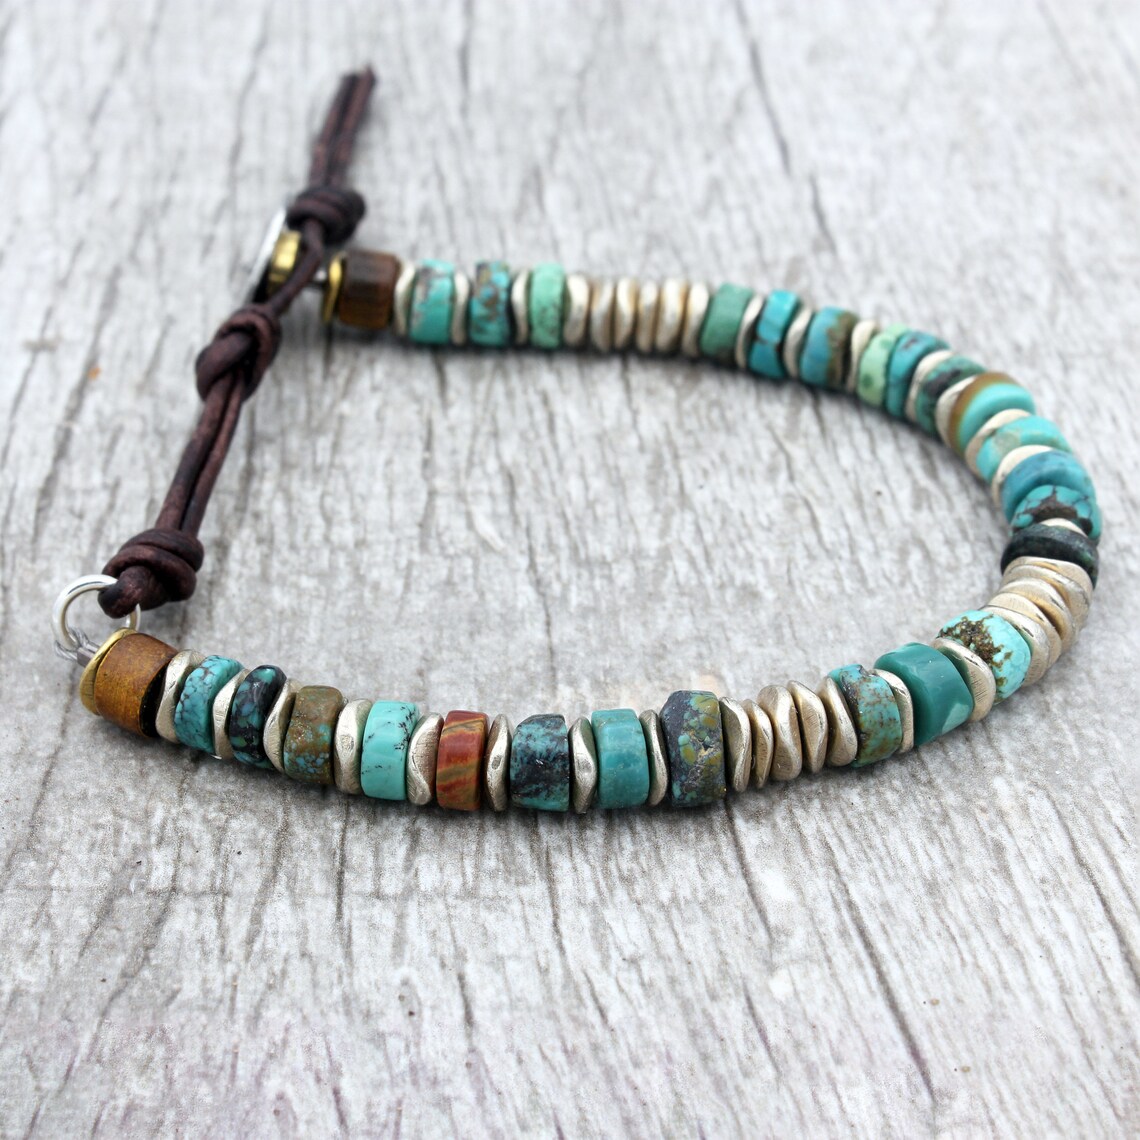 Rustic Turquoise and Leather Bracelet for Men - Etsy